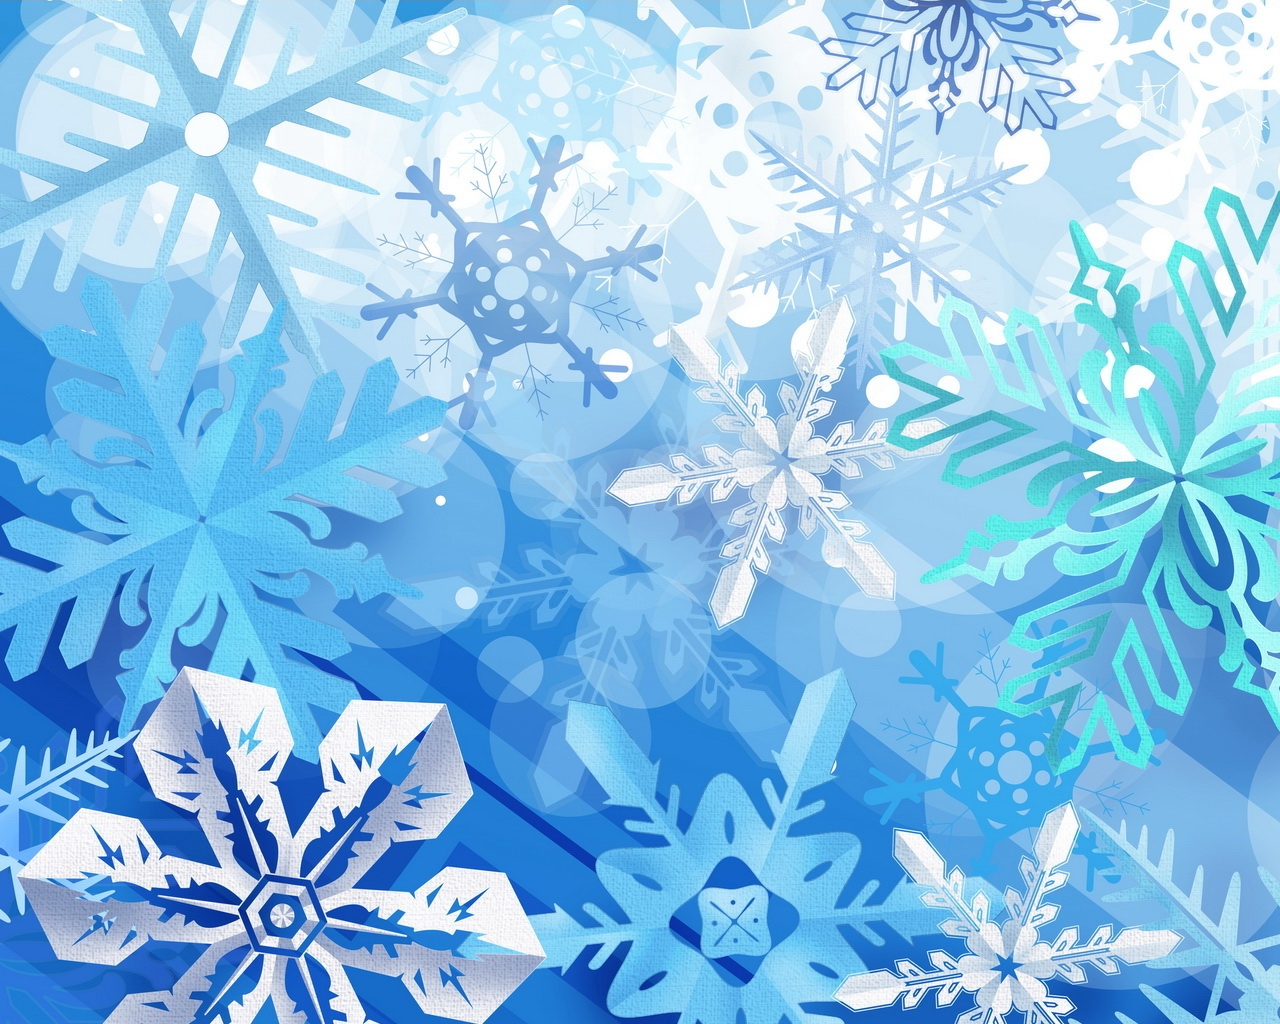 Free Abstract Winter Snowflakes Backgrounds For PowerPoint   Holiday